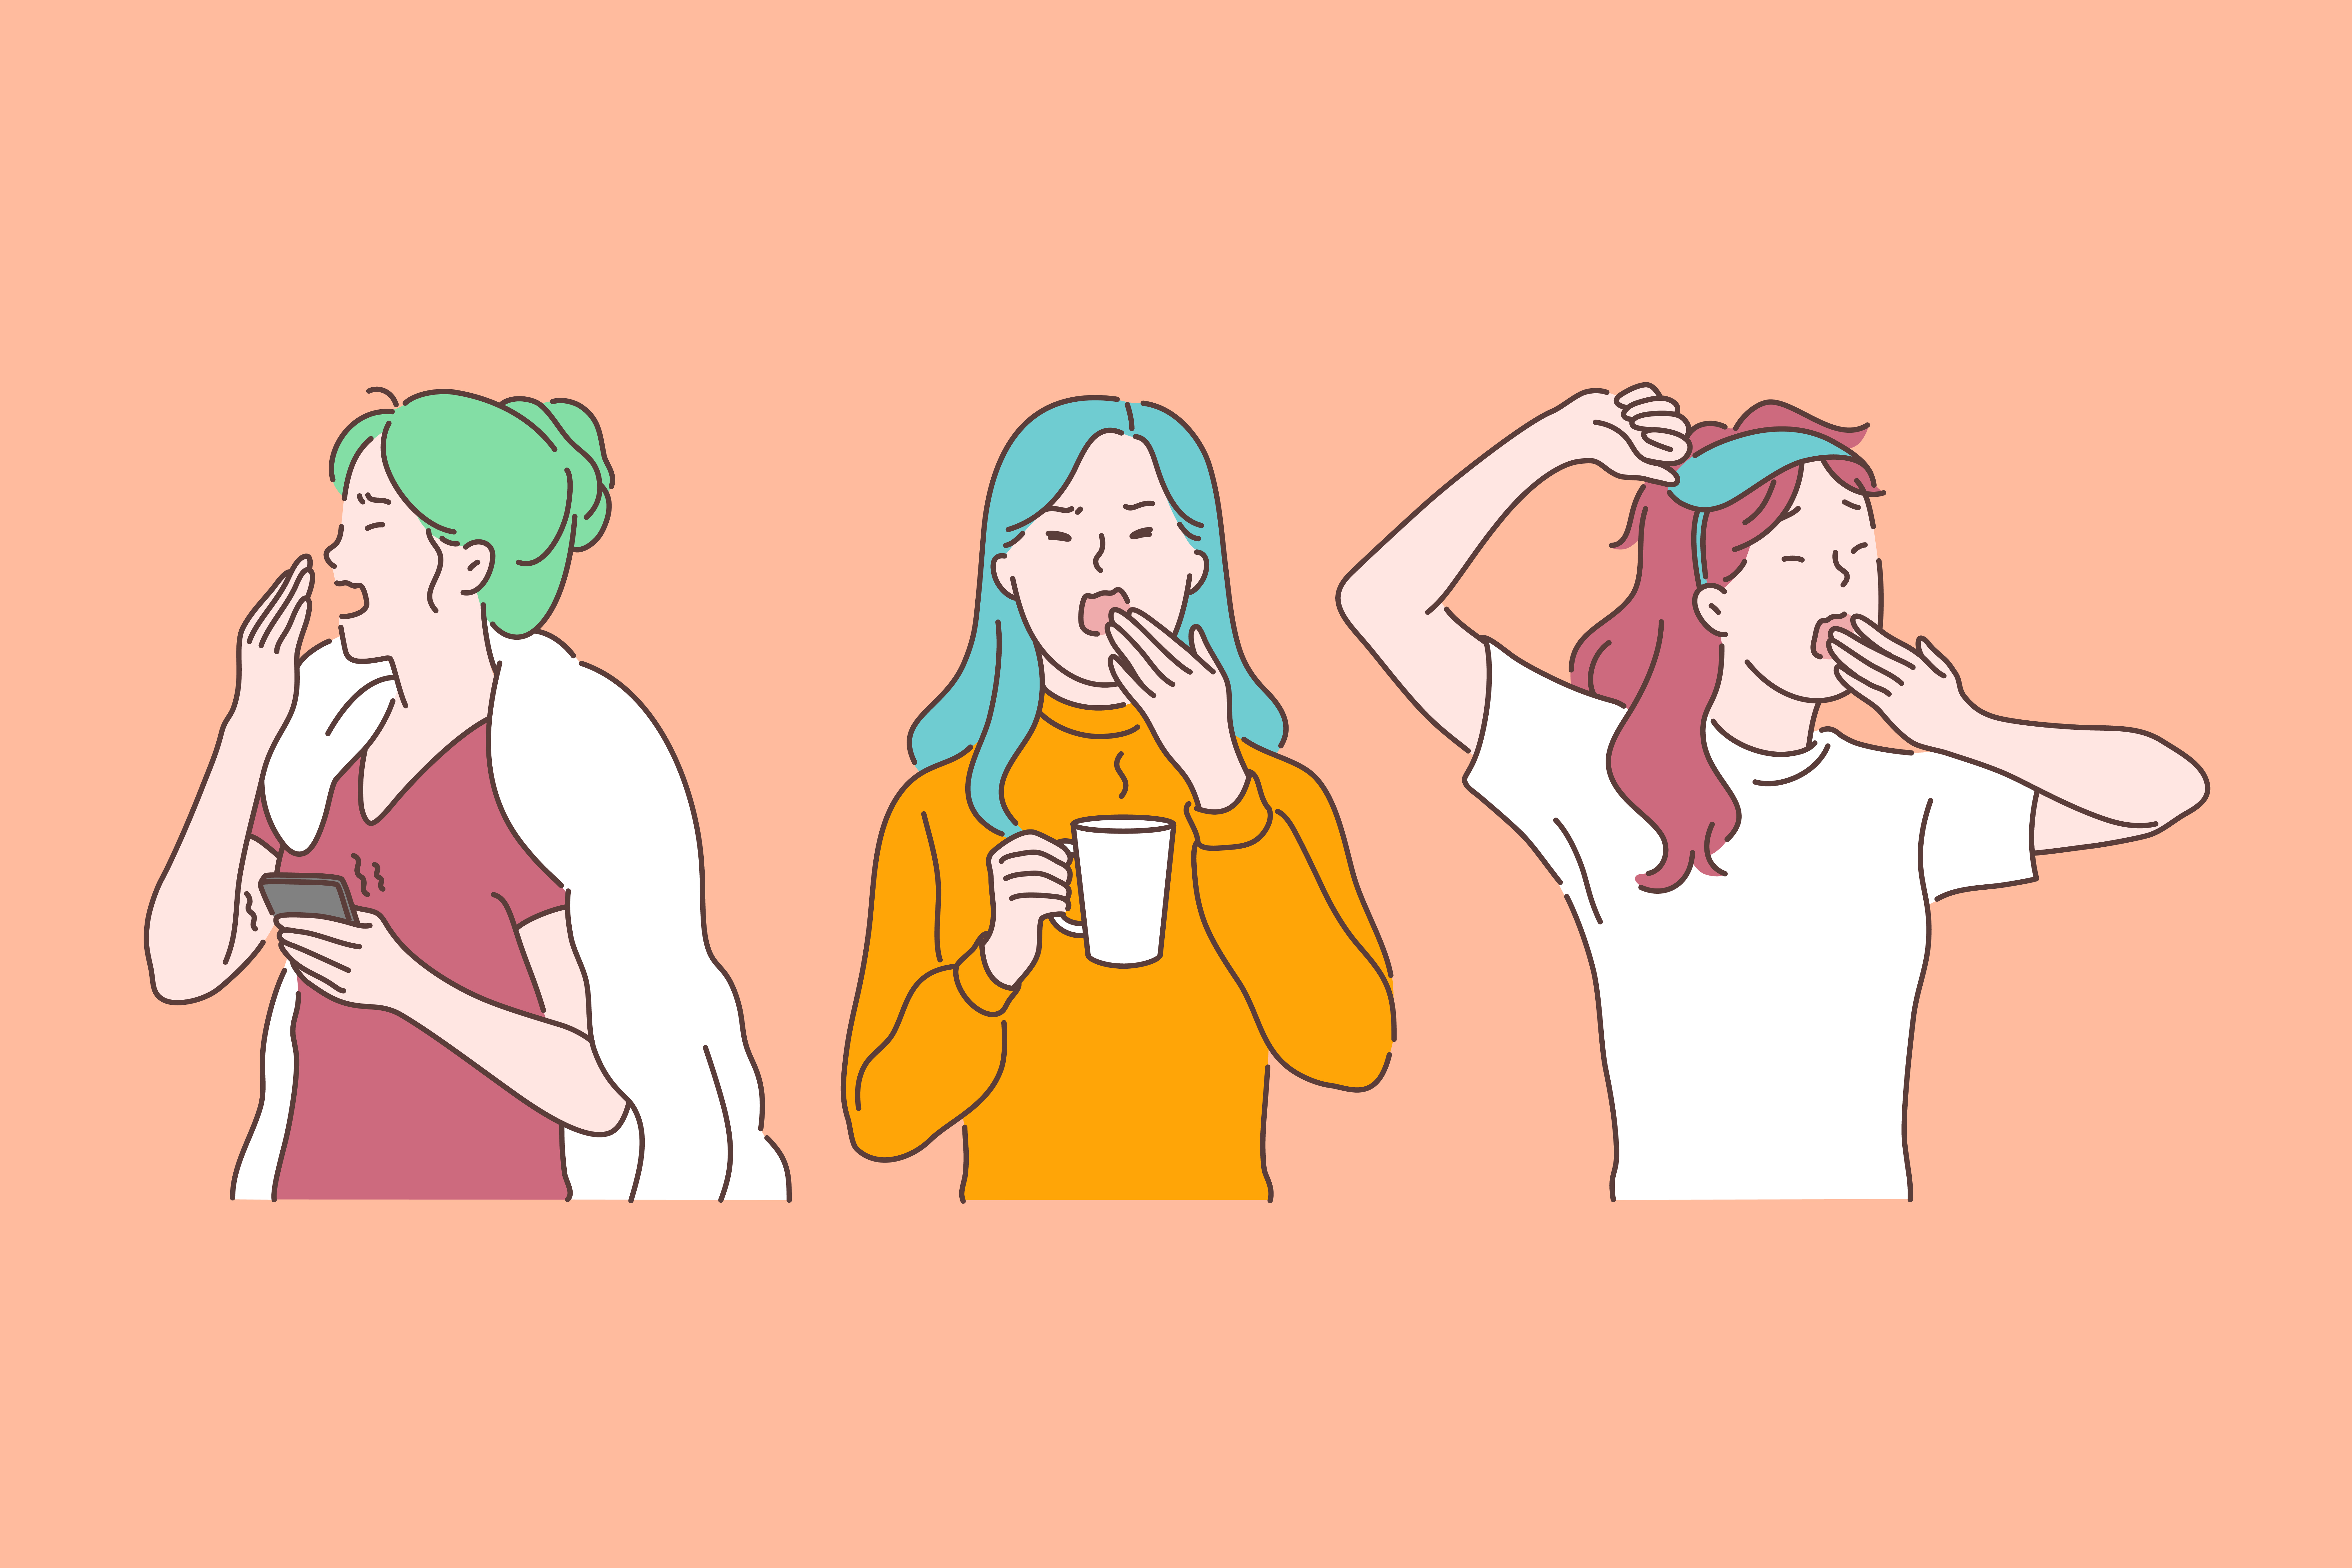 An illustration on a peach-colored background of three women, all yawning in different contexts — one is on the phone, another is holding a cup, while the third is just waking up.